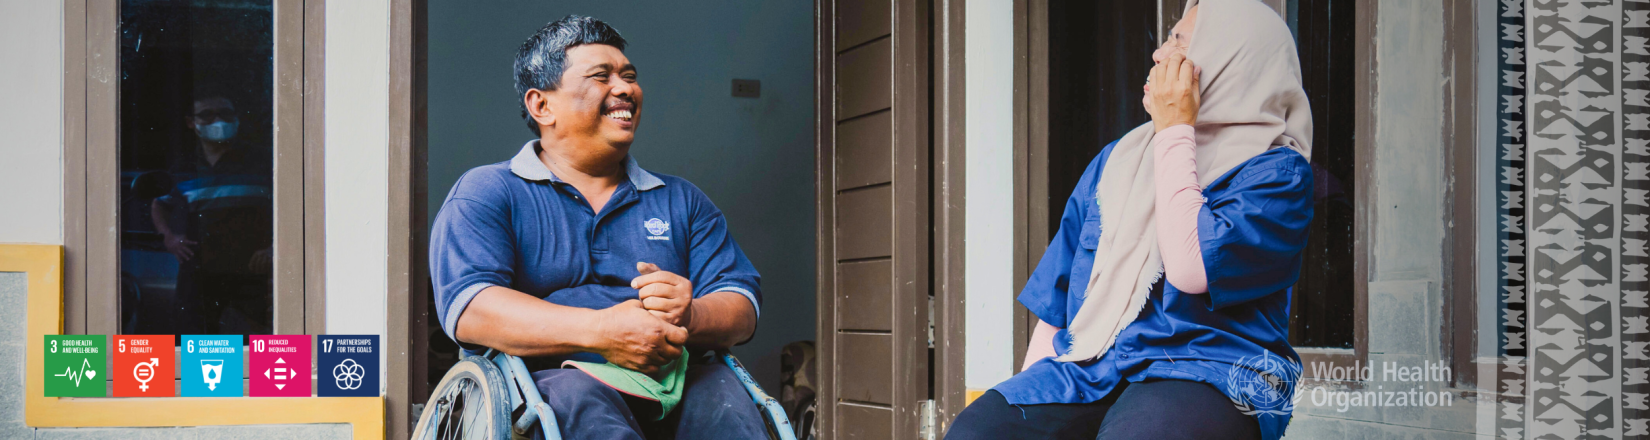 People with Disabilities Break Down the Barriers to Accessing Healthcare for All